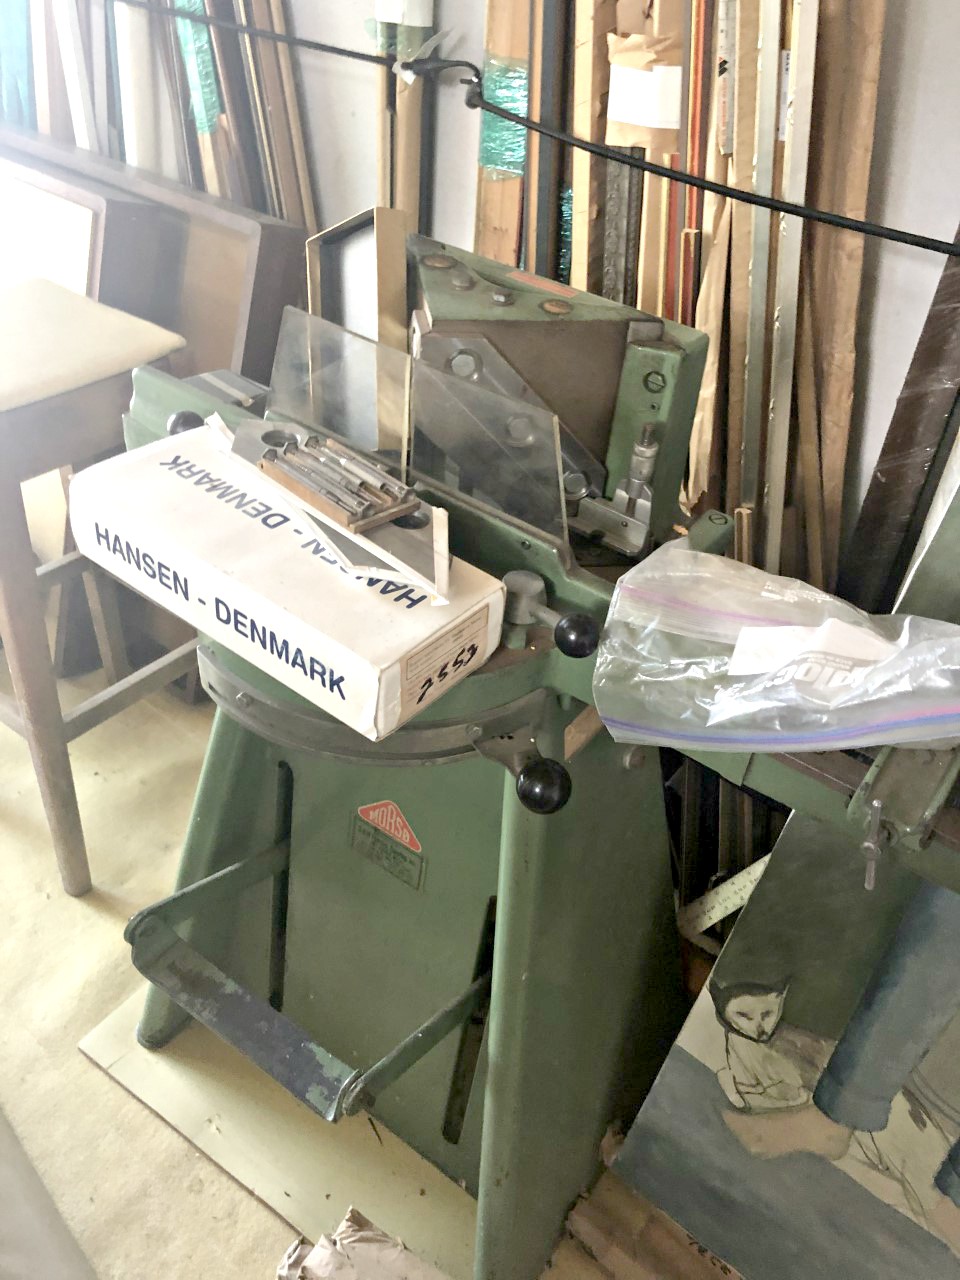 Picture Framing Equipment Lot: Morso Chopper, C&H Oval Mat & Glass Cutter / Circle Cutter, Assorted Hardware, Assorted Matboard, Assorted Wood Moulding, Miter Saw Hand Cutter, & Ingento Paper Cutter (Used) Item # AGFS-79 (New York)